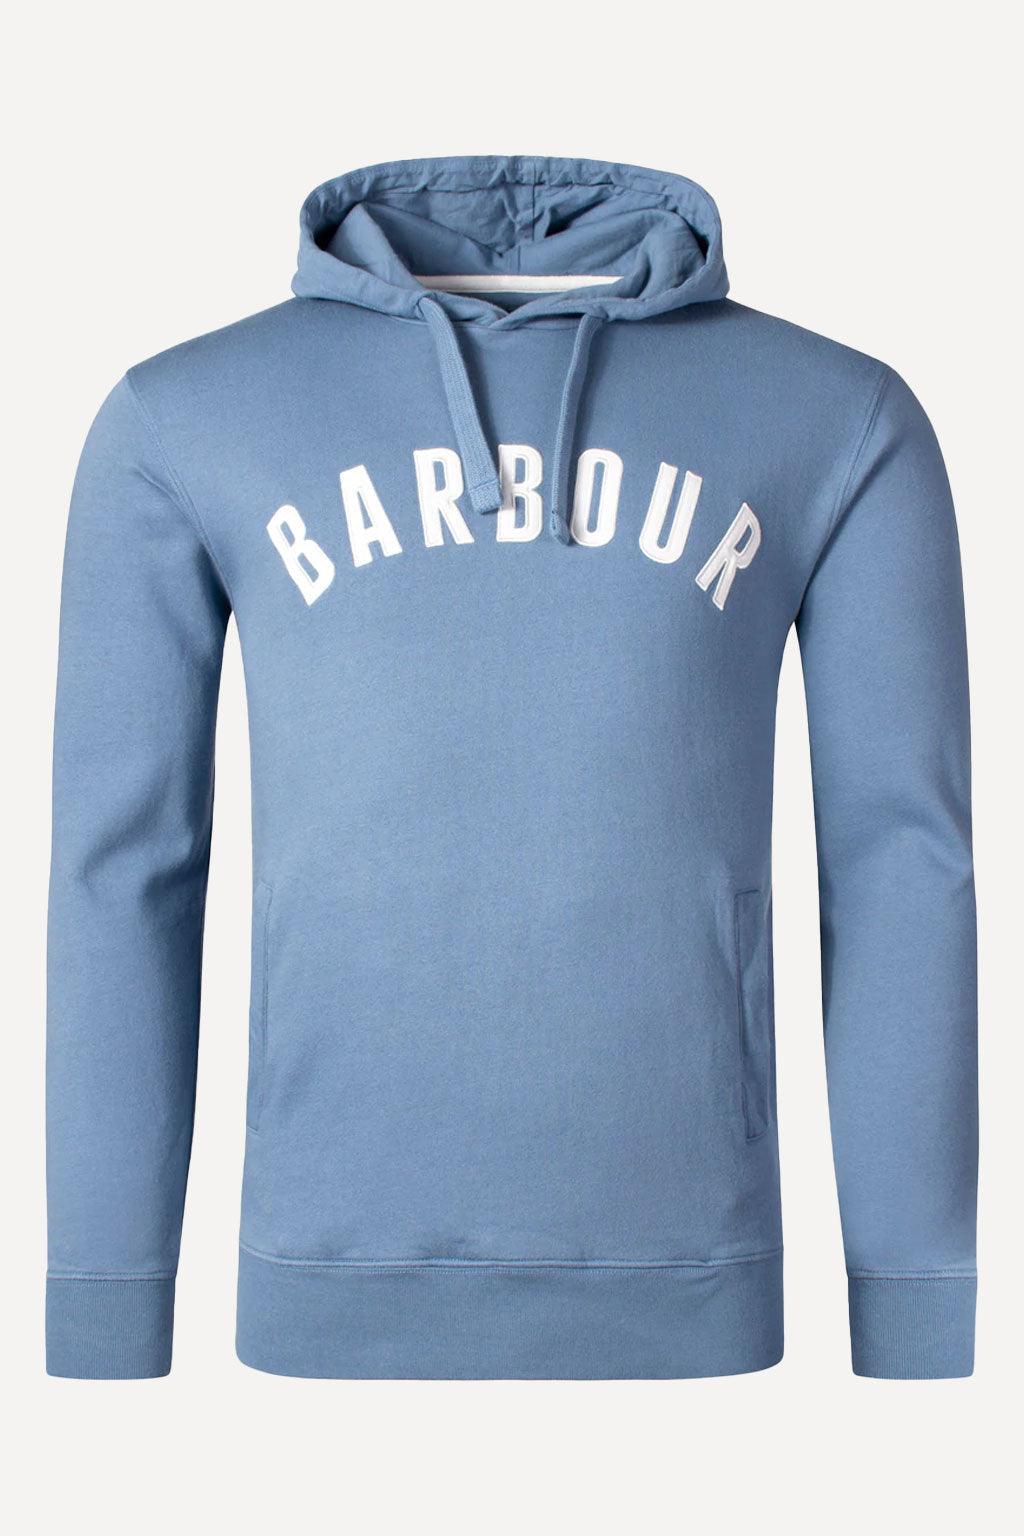 Barbour hoodie | Big Boss | the menswear concept